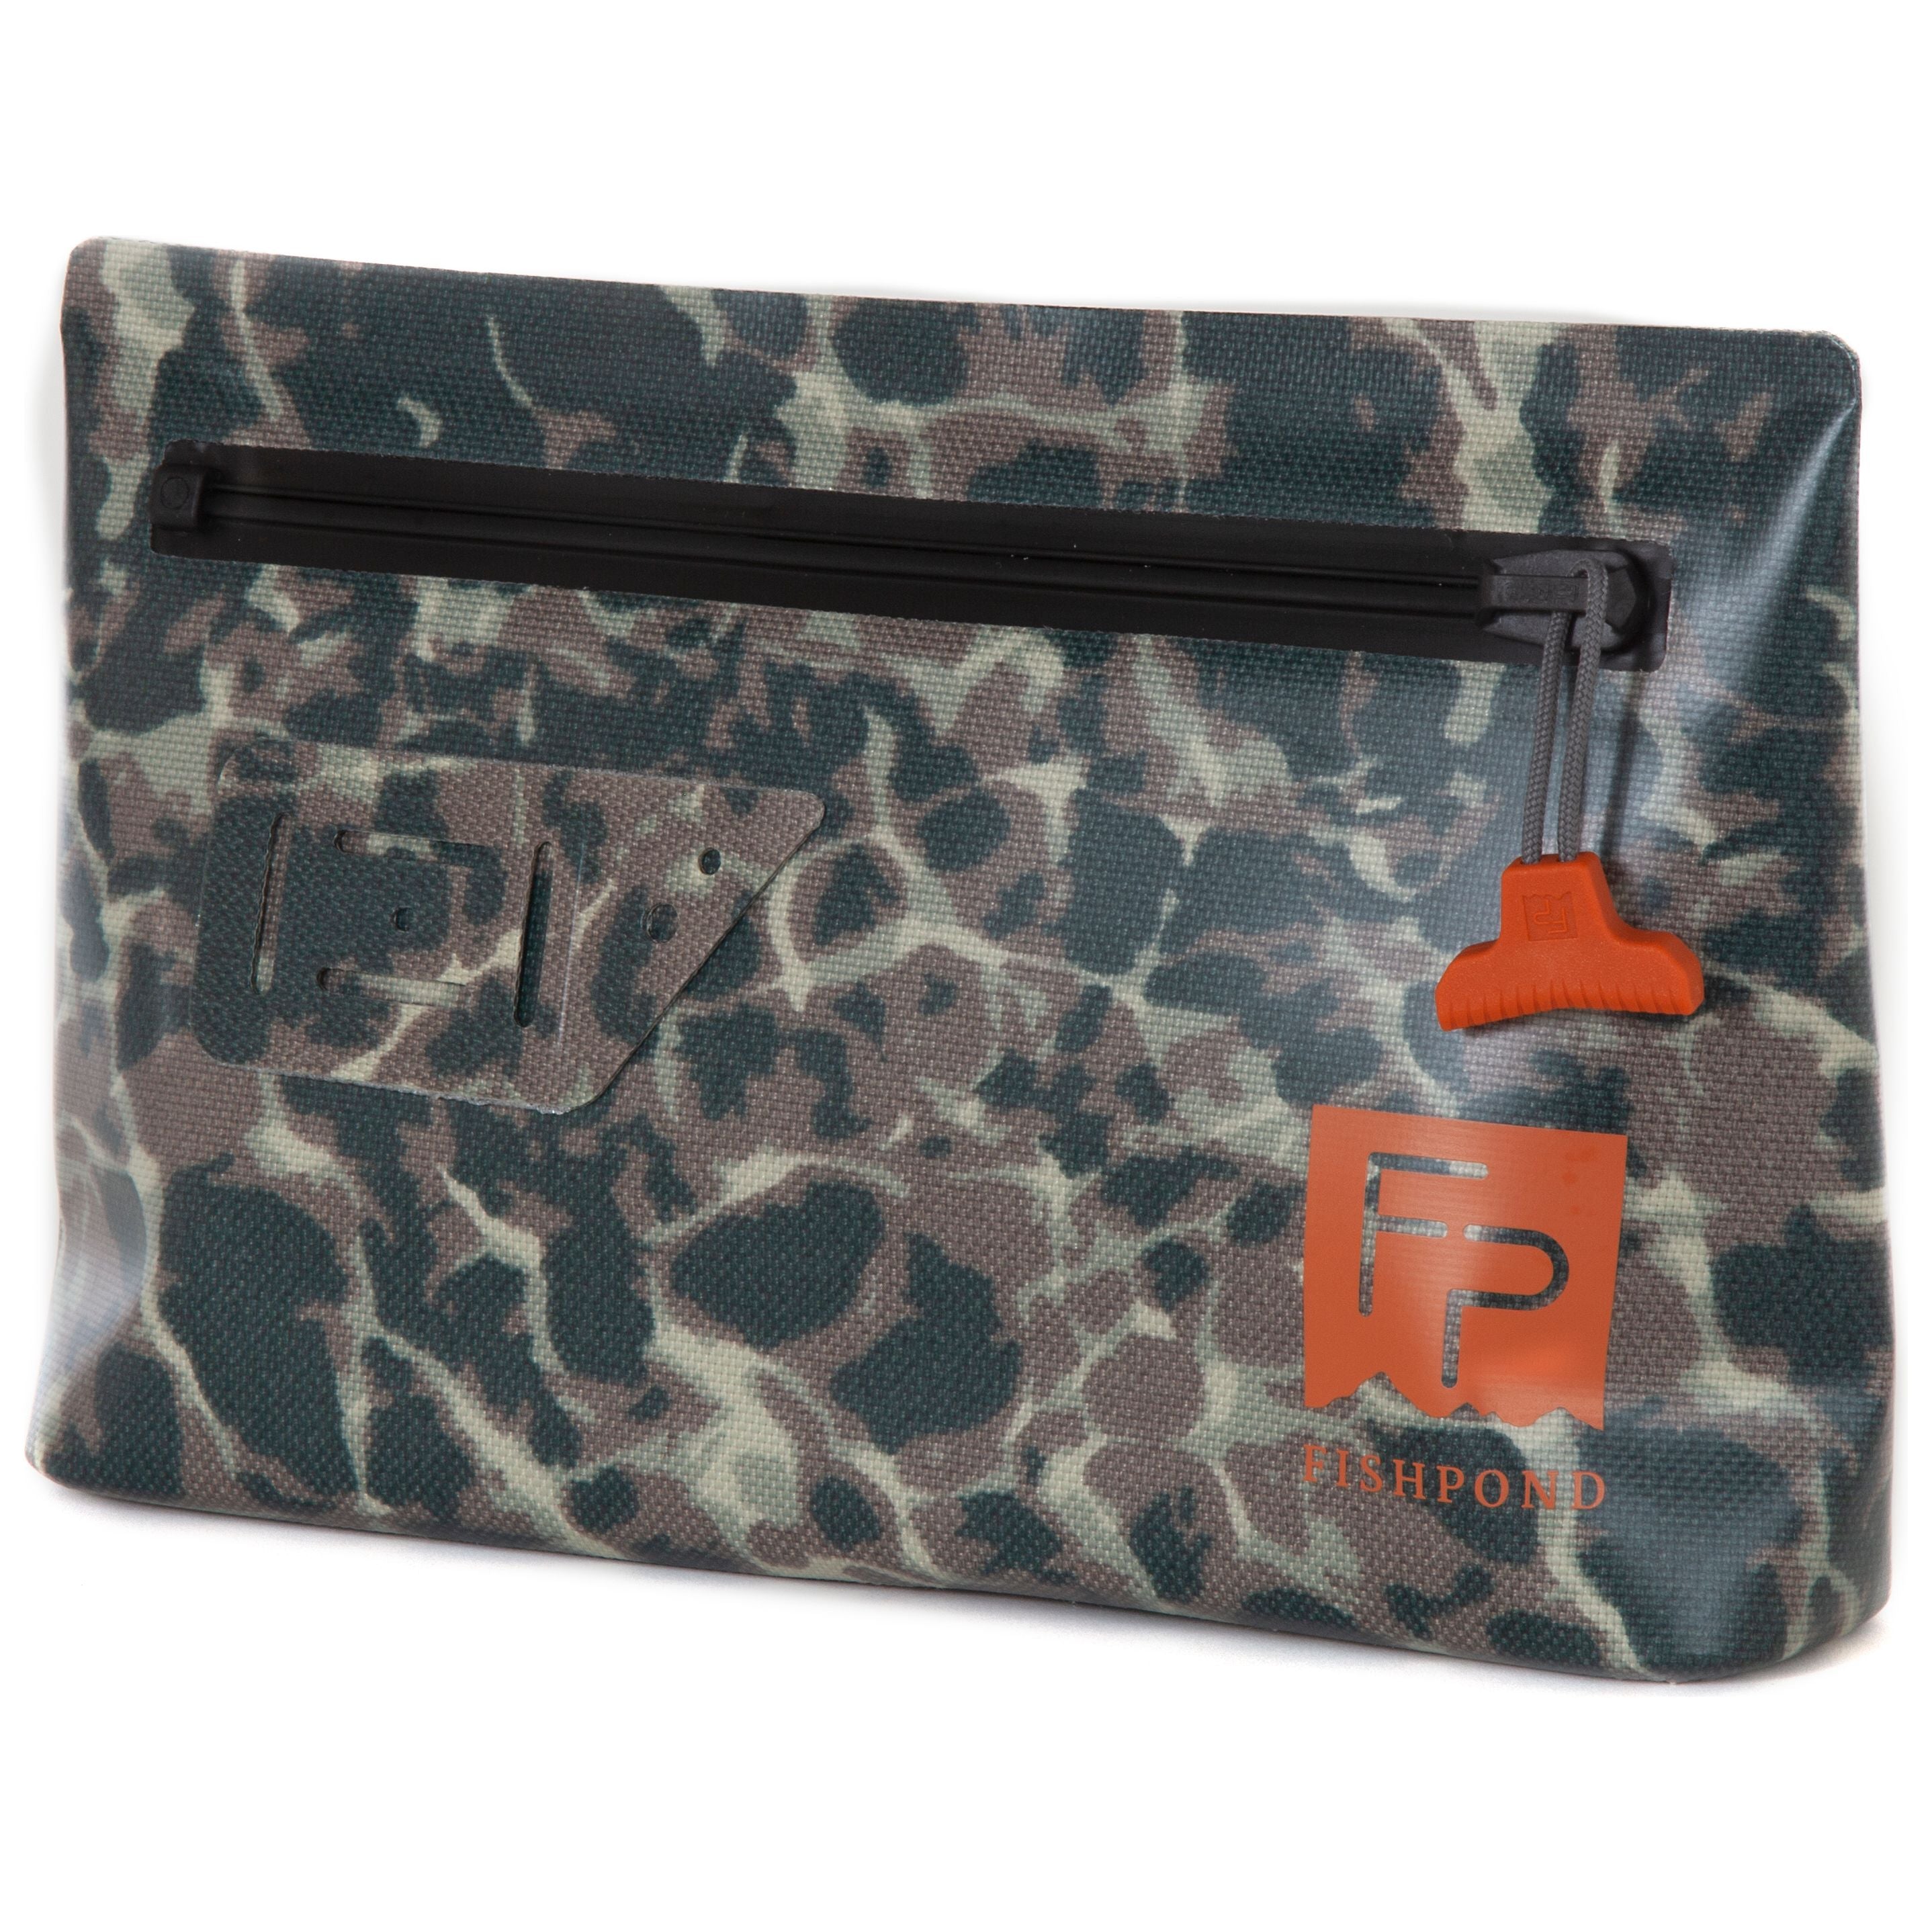 Fishpond Thunderhead Submersible Pouch Eco Riverbed Camo Image 01